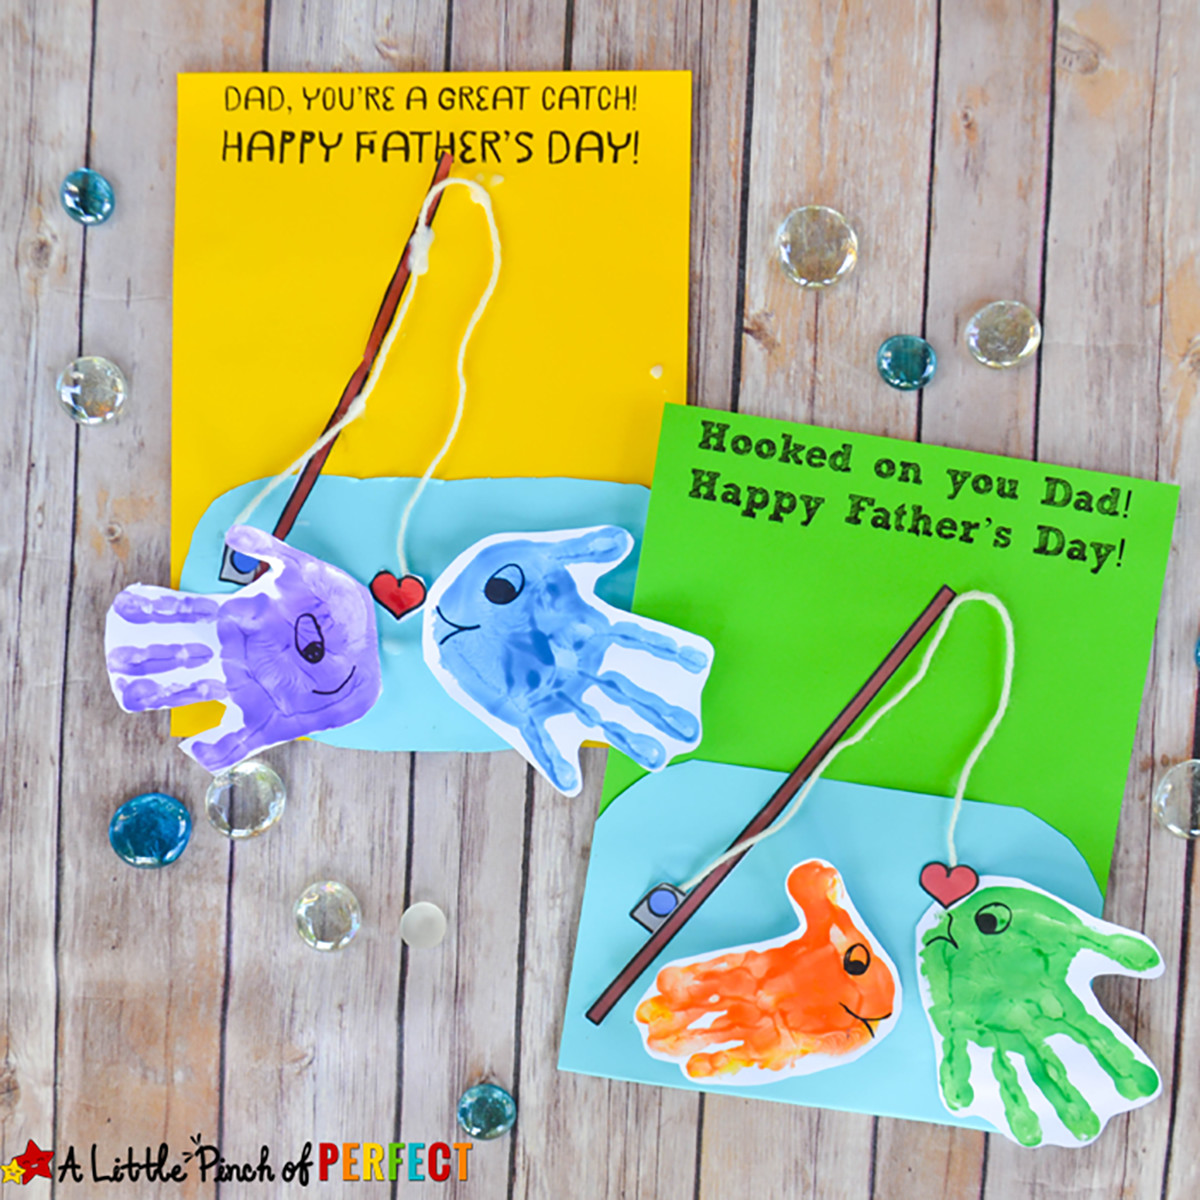 Fathers Day Crafts For Kindergarten
 DIY Preschool Father s Day Gifts Your Little es Will